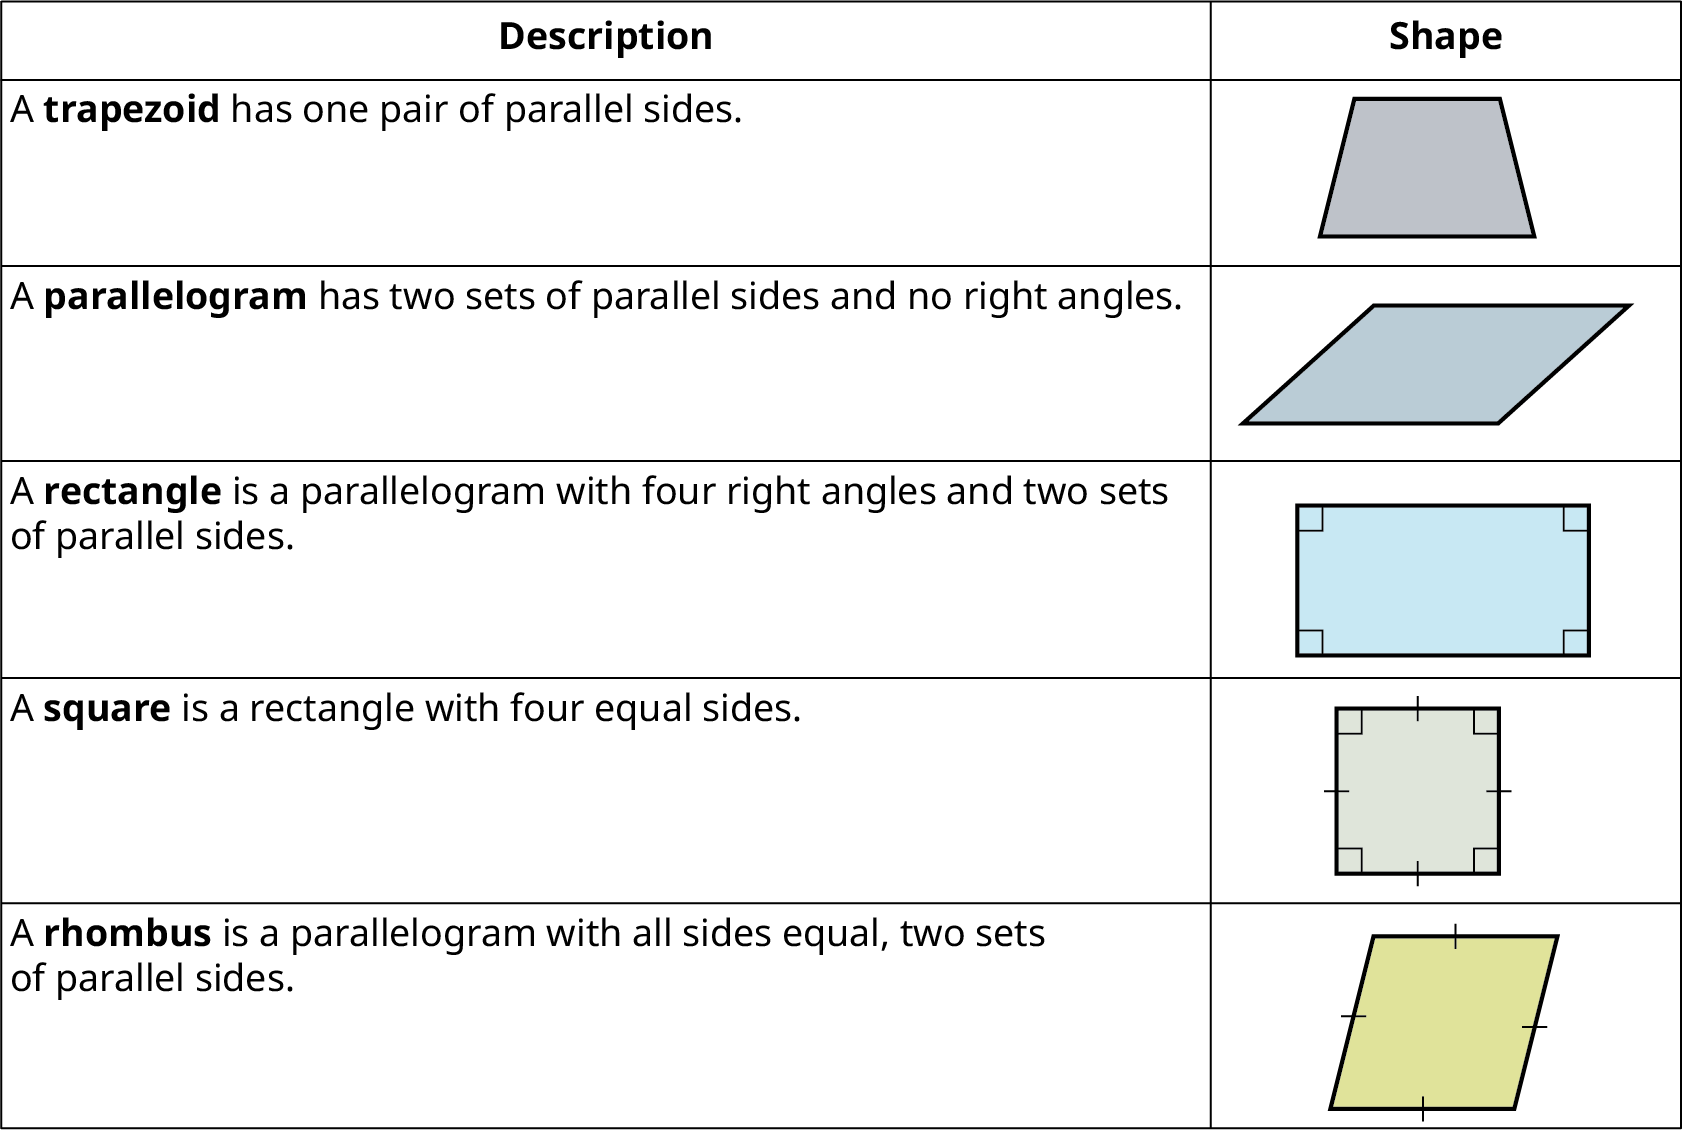 A table titled, Quadrilaterals. The table has two columns, and displays the following: Row 1: A trapezoid has one pair of paraellel sides, image of a trapezoid; Row 2: A parallelogram has two sets of parallel sides and no right angles, image of a parallelogram; Row 3: A rectangle is a parallelogram with four right angles and two sets of parellel sides, image of a rectangle; Row 4: A square is a rectangle with four equal sides; image of a square; Row 5: A rhombus is a parallelogram with all sides equal, two sets of parallel sides, image of a rhombus.